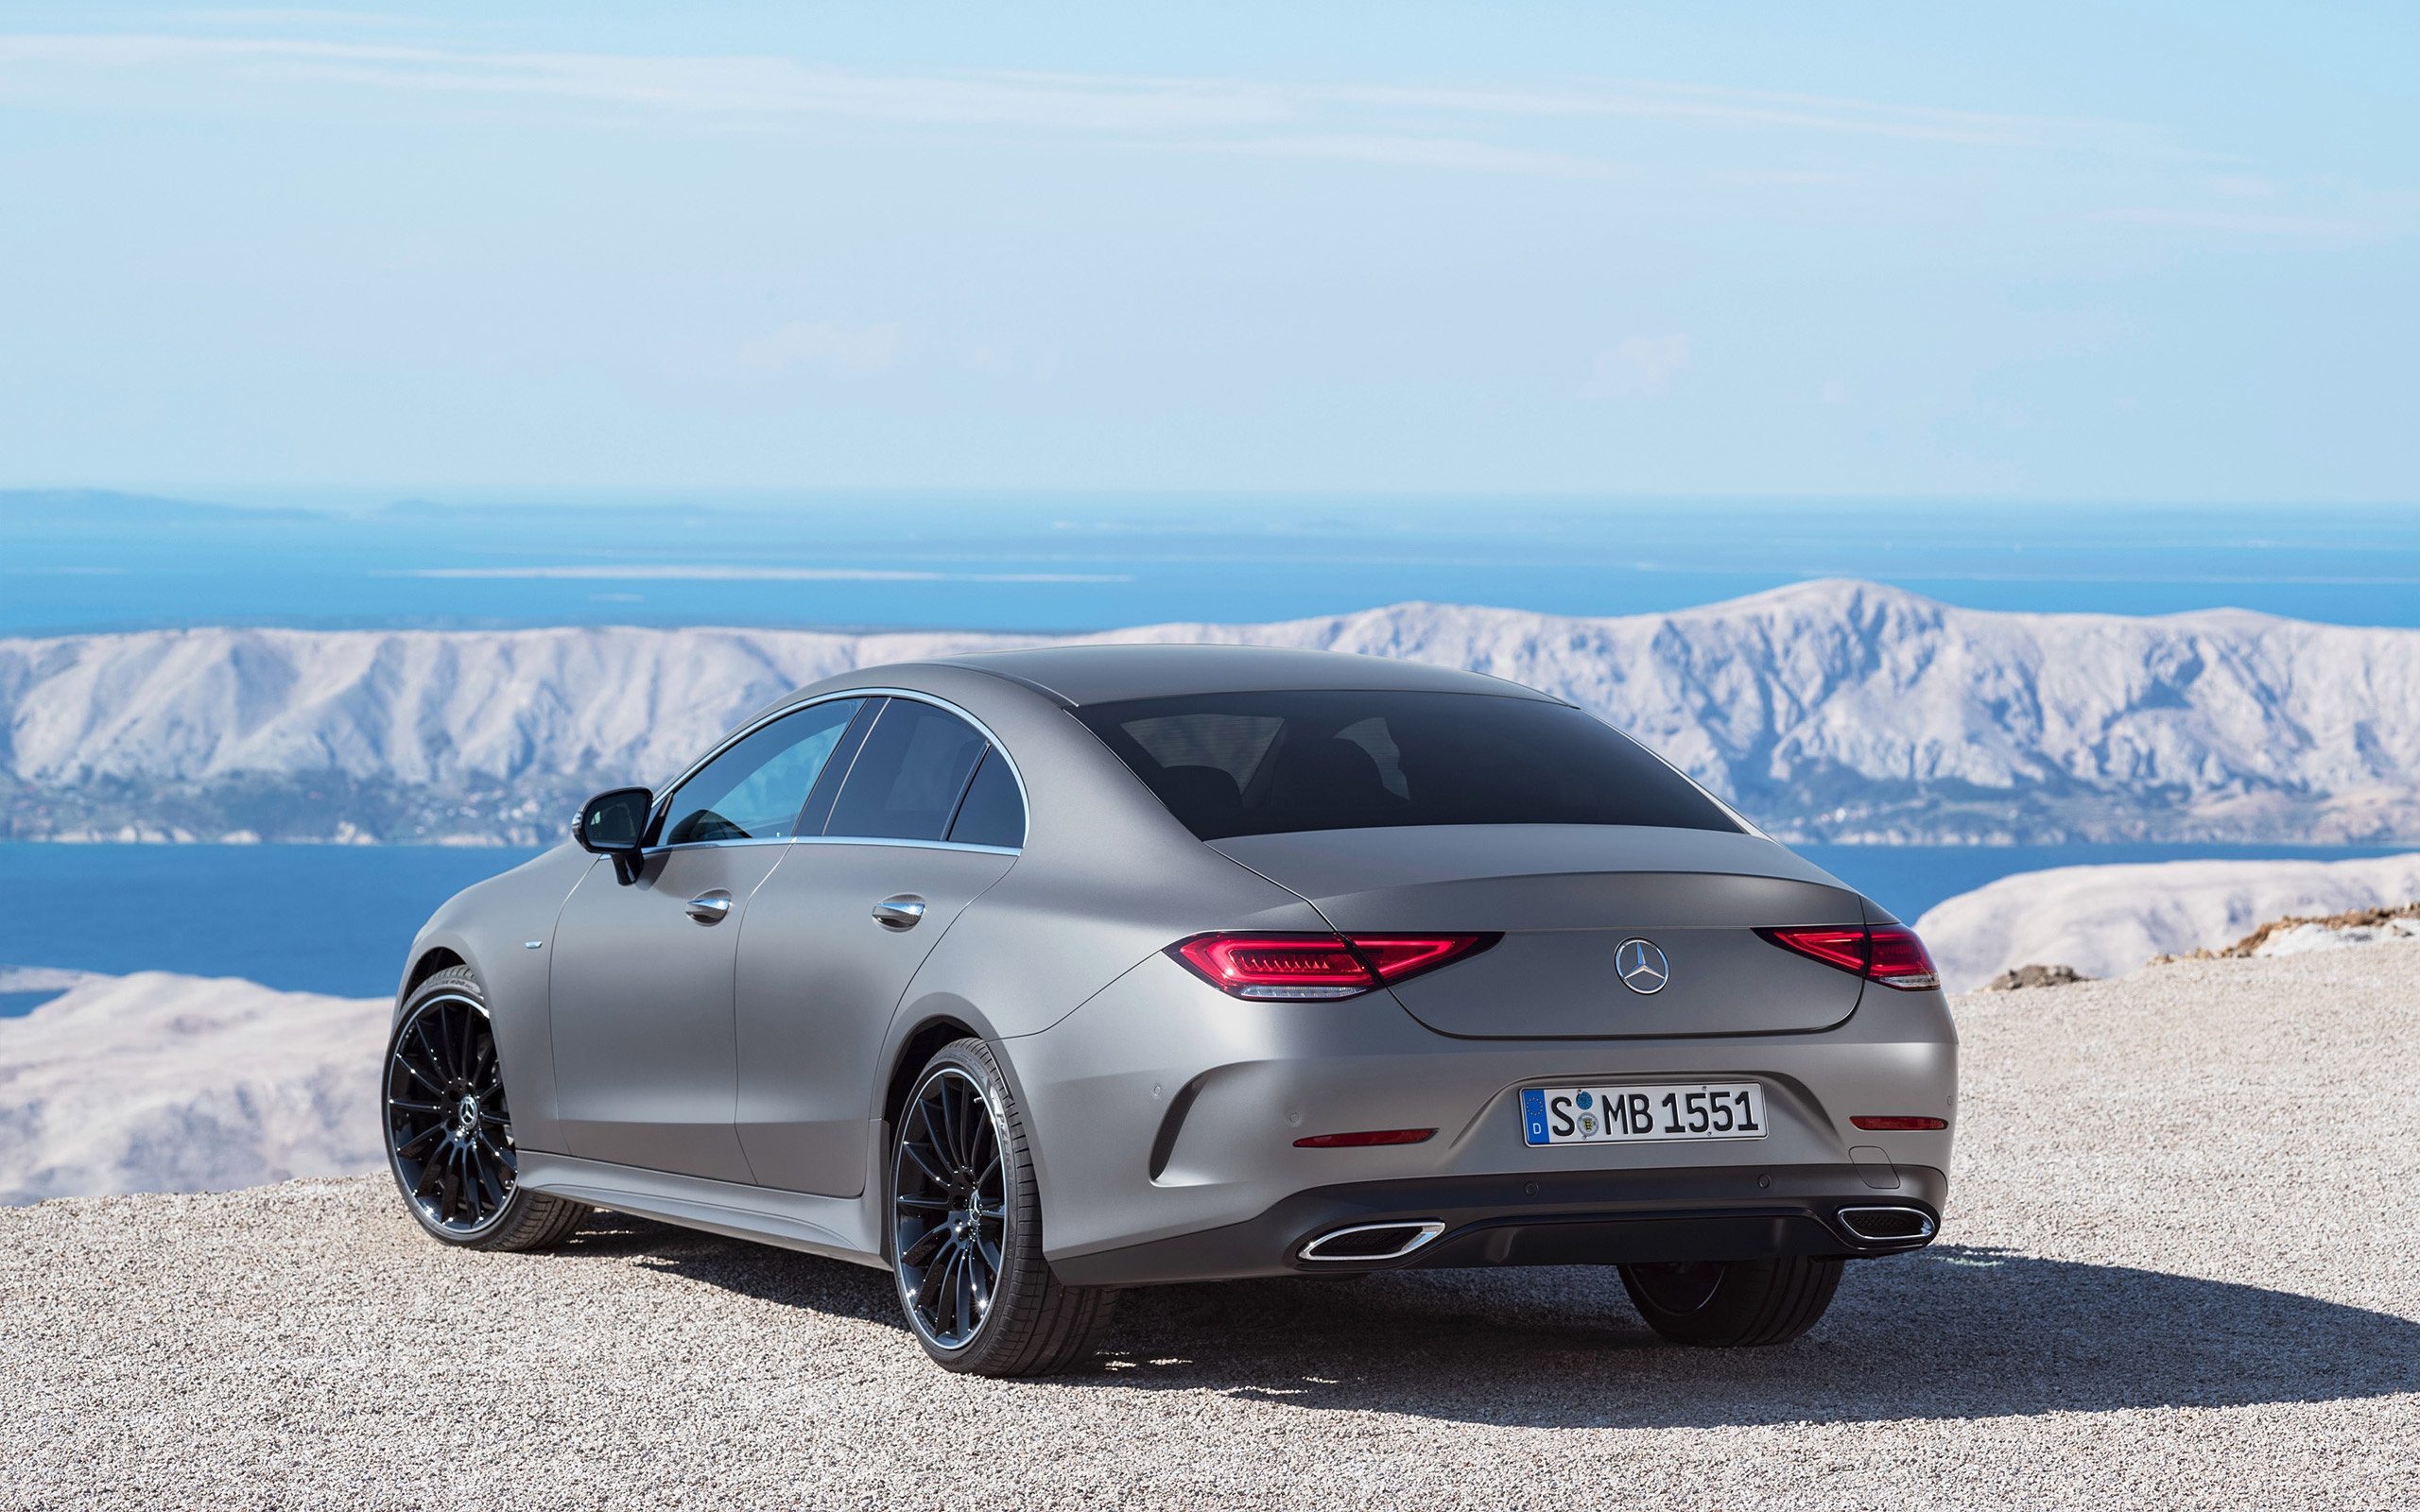 Mercedes-Benz CLS, Sporty rear view, Gray matte finish, High-quality images, 2560x1600 HD Desktop